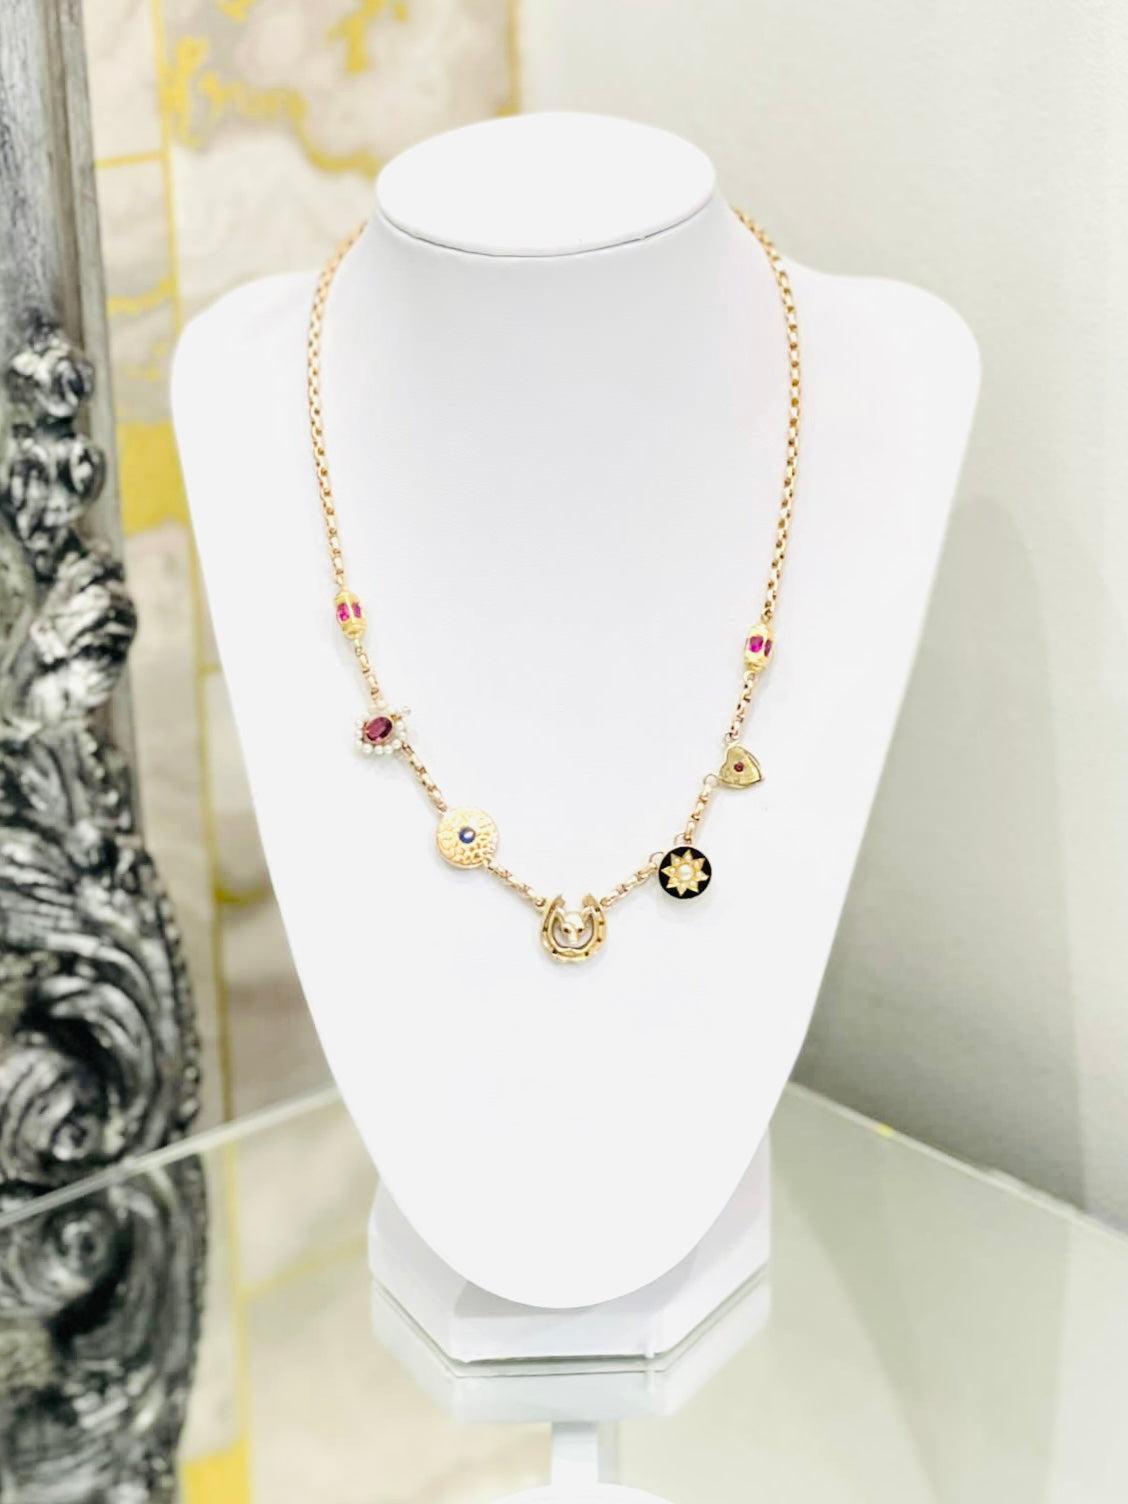 Victorian Charm Necklace 15ct Gold With Rubies, Sapphires & Pearls

Fixed multiple charms sat on a hoop link necklace. Charms having old hallmarks in a mix of 15ct,  9ct gold and luxury gemstones:
- Fox with Ruby eyes in a horse shoe also set with